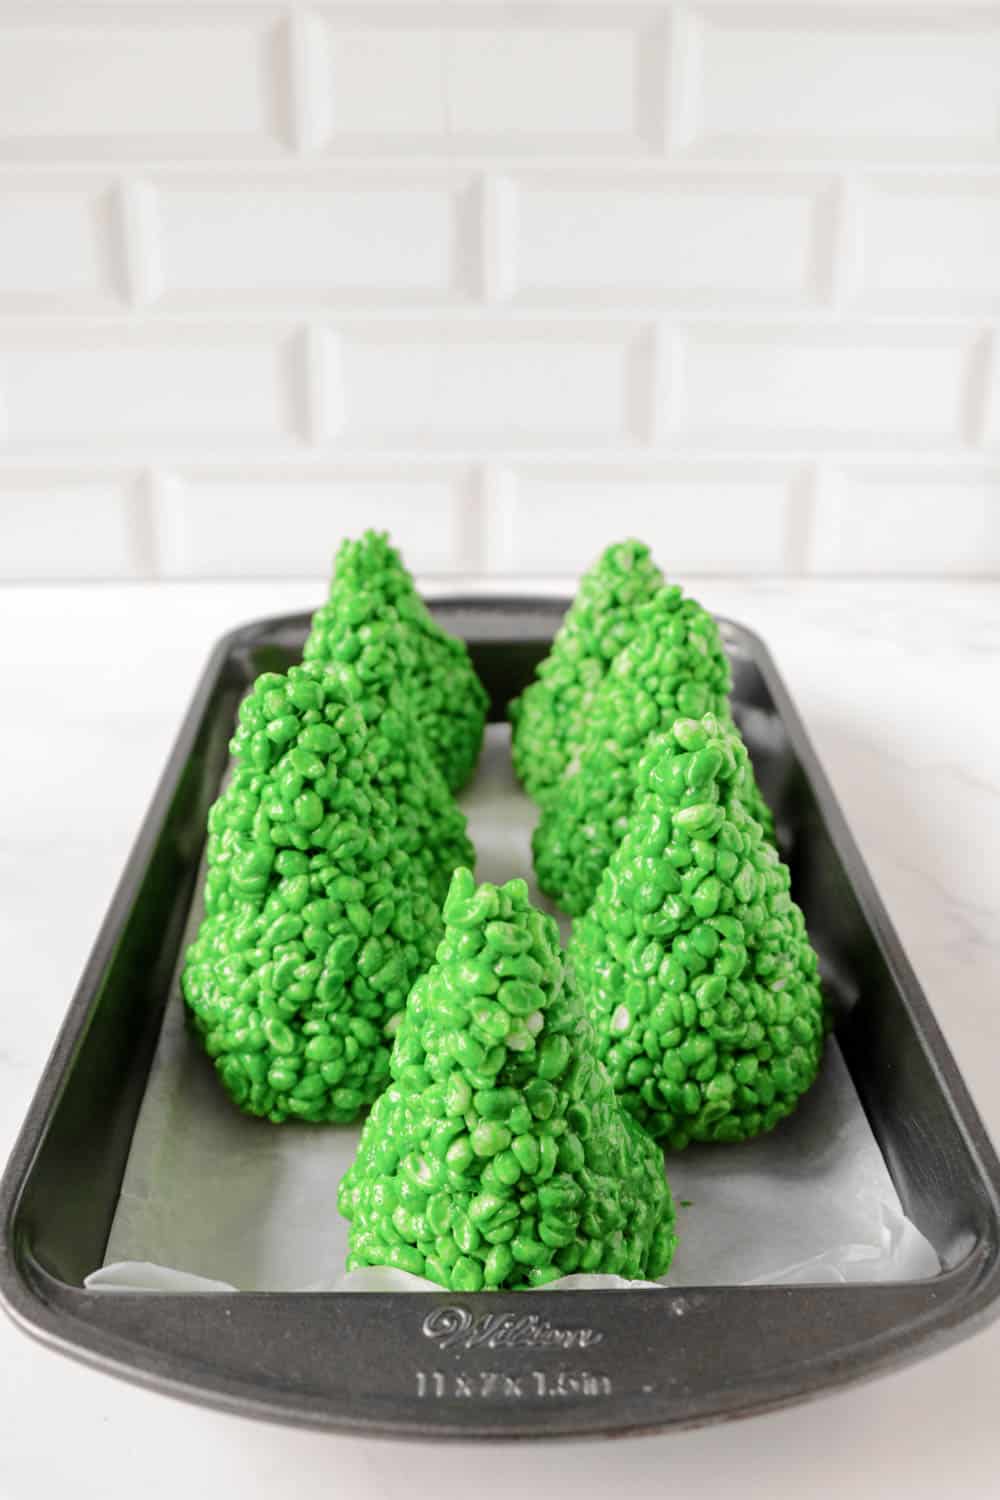 Roll green rice crispies into balls then trees.